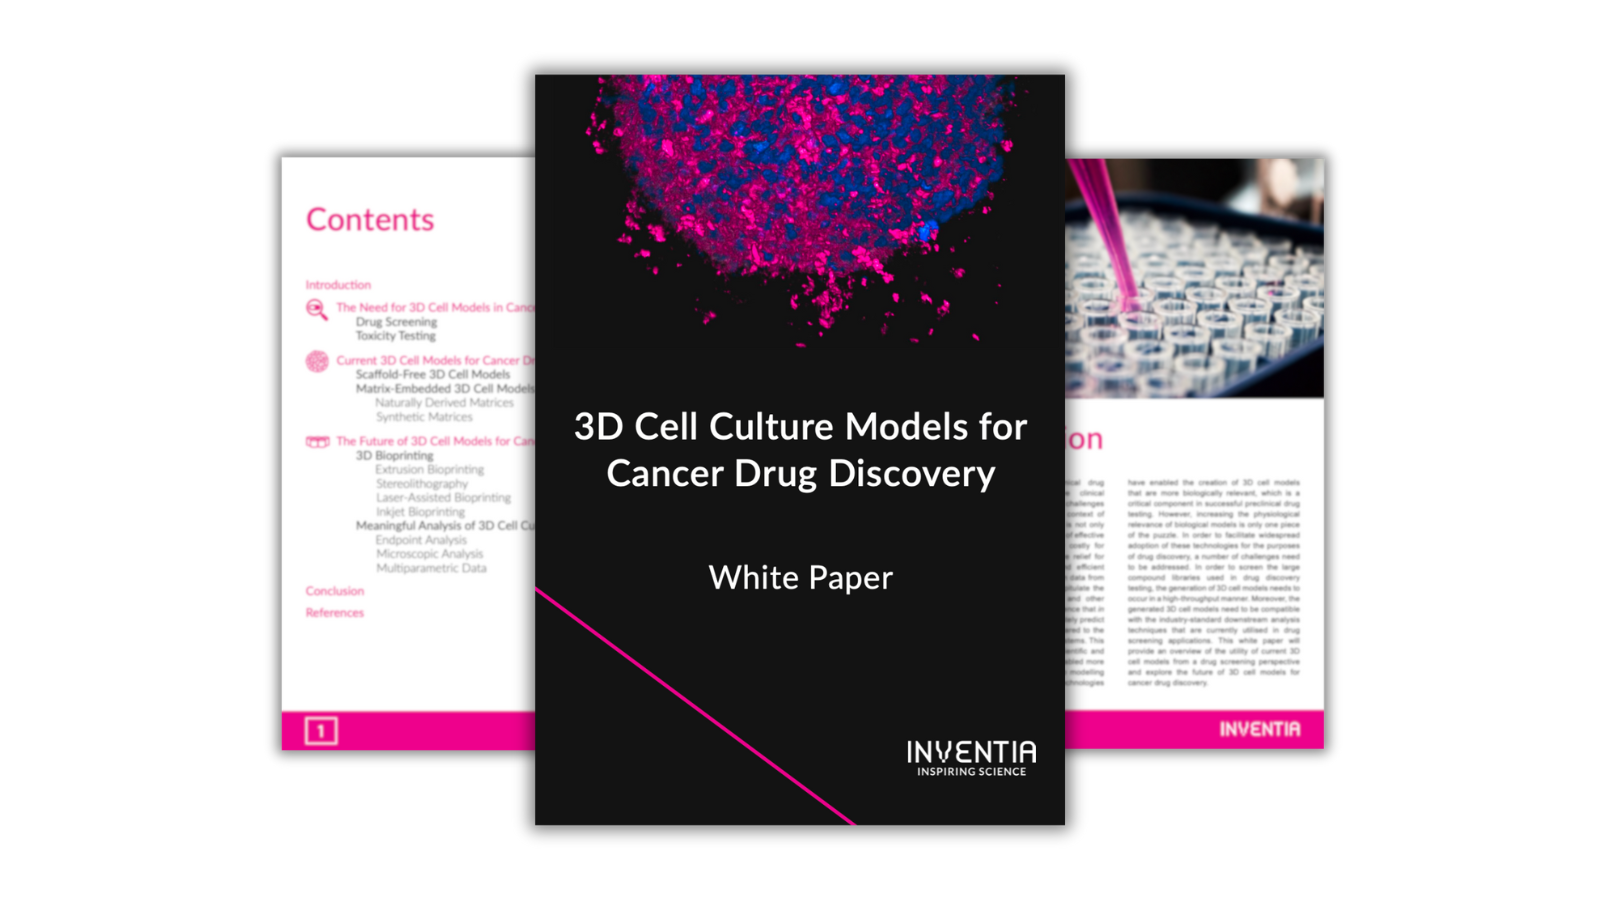 3D cell culture models for cancer drug discovery